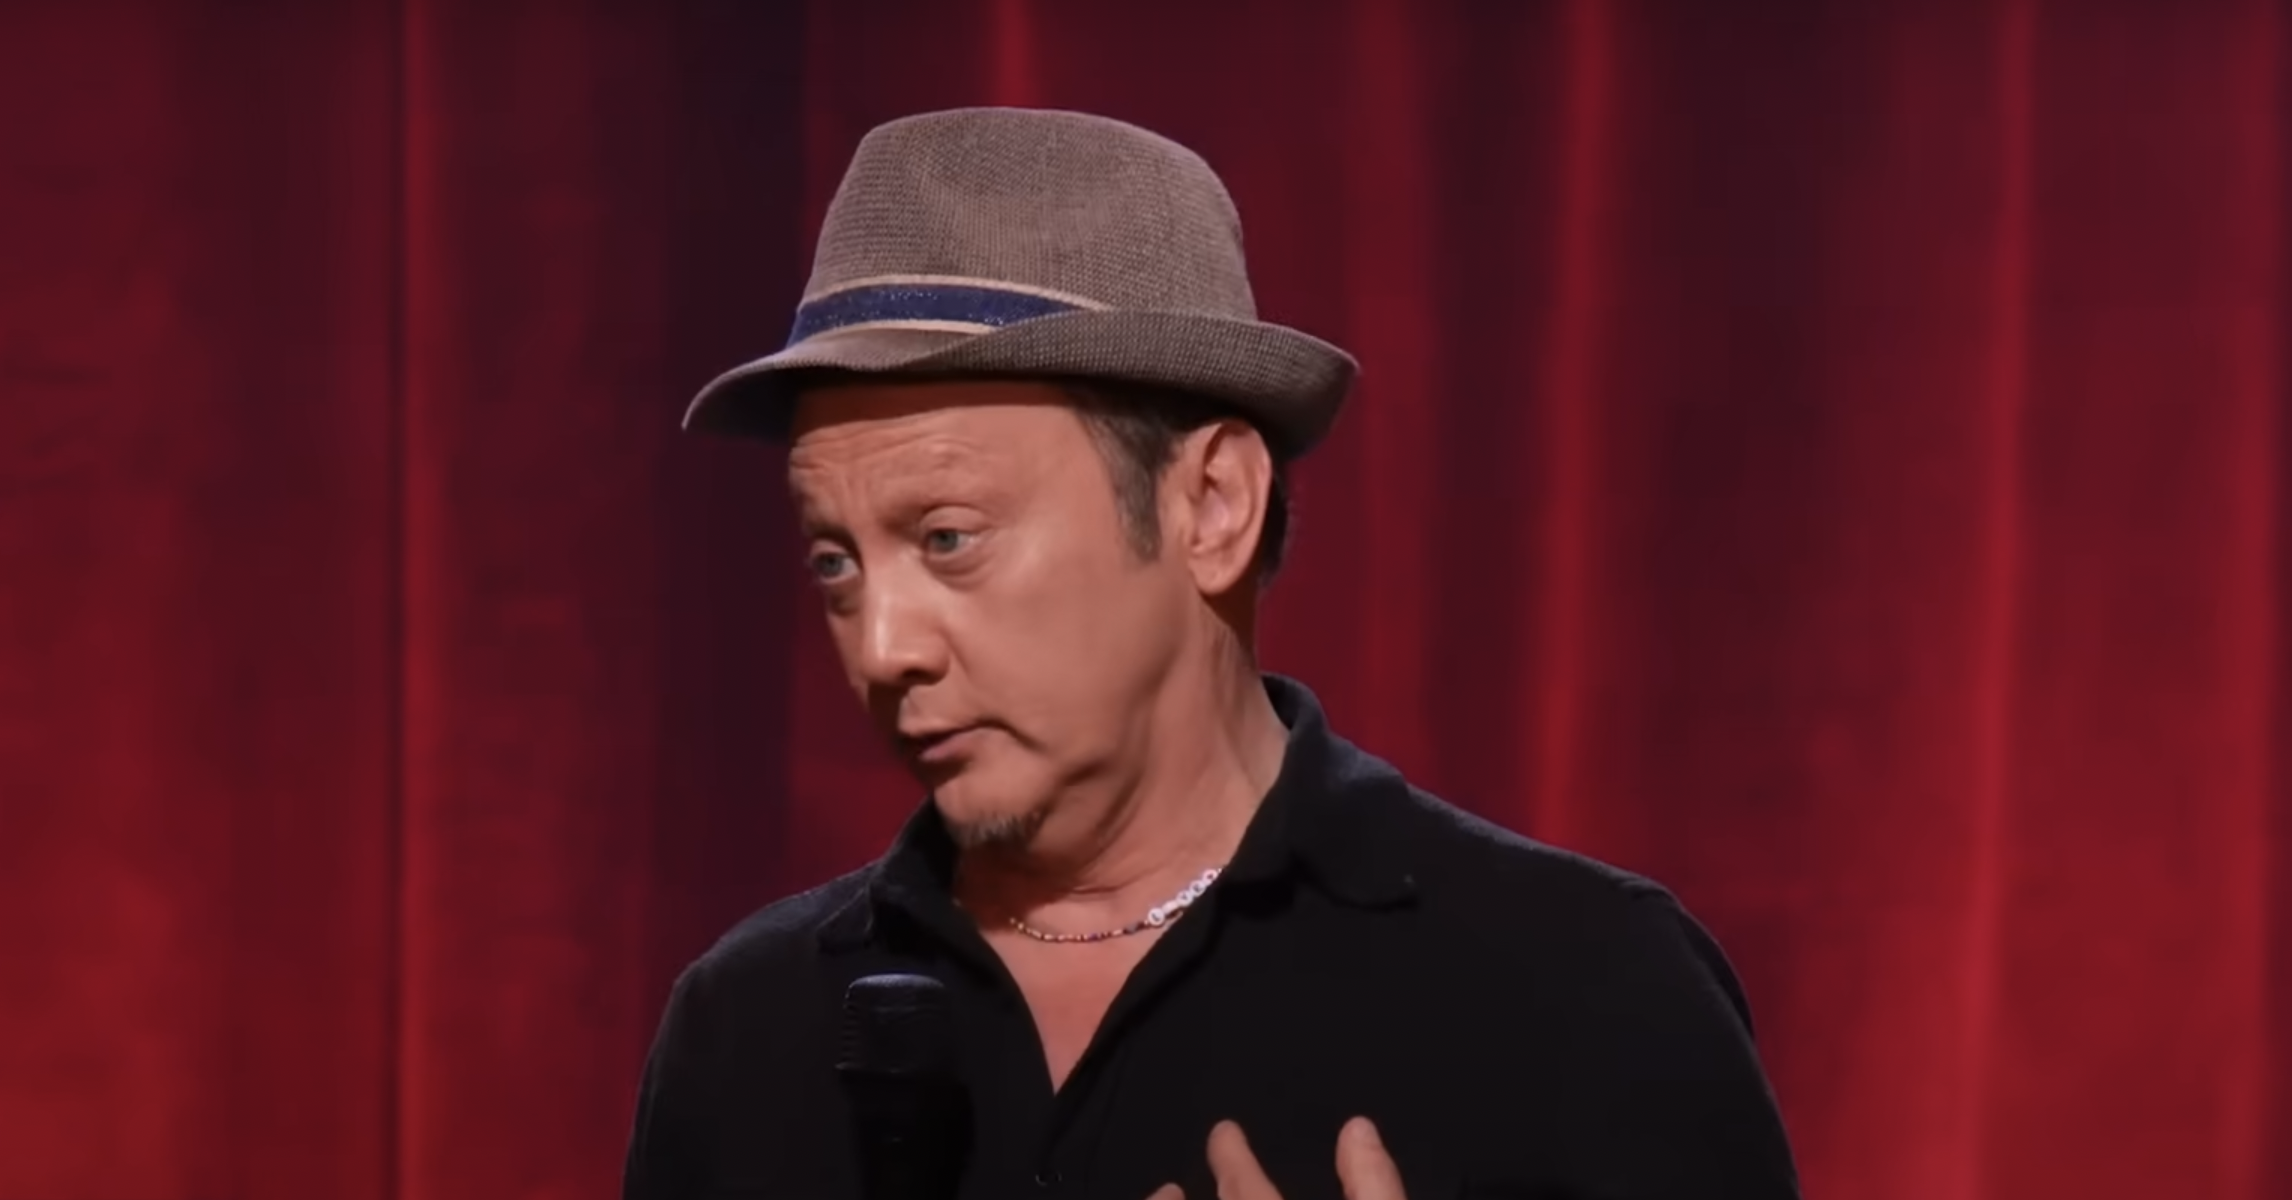 Rob Schneider Forced To End Comedy Set After Being Booed For Offensive Jokes